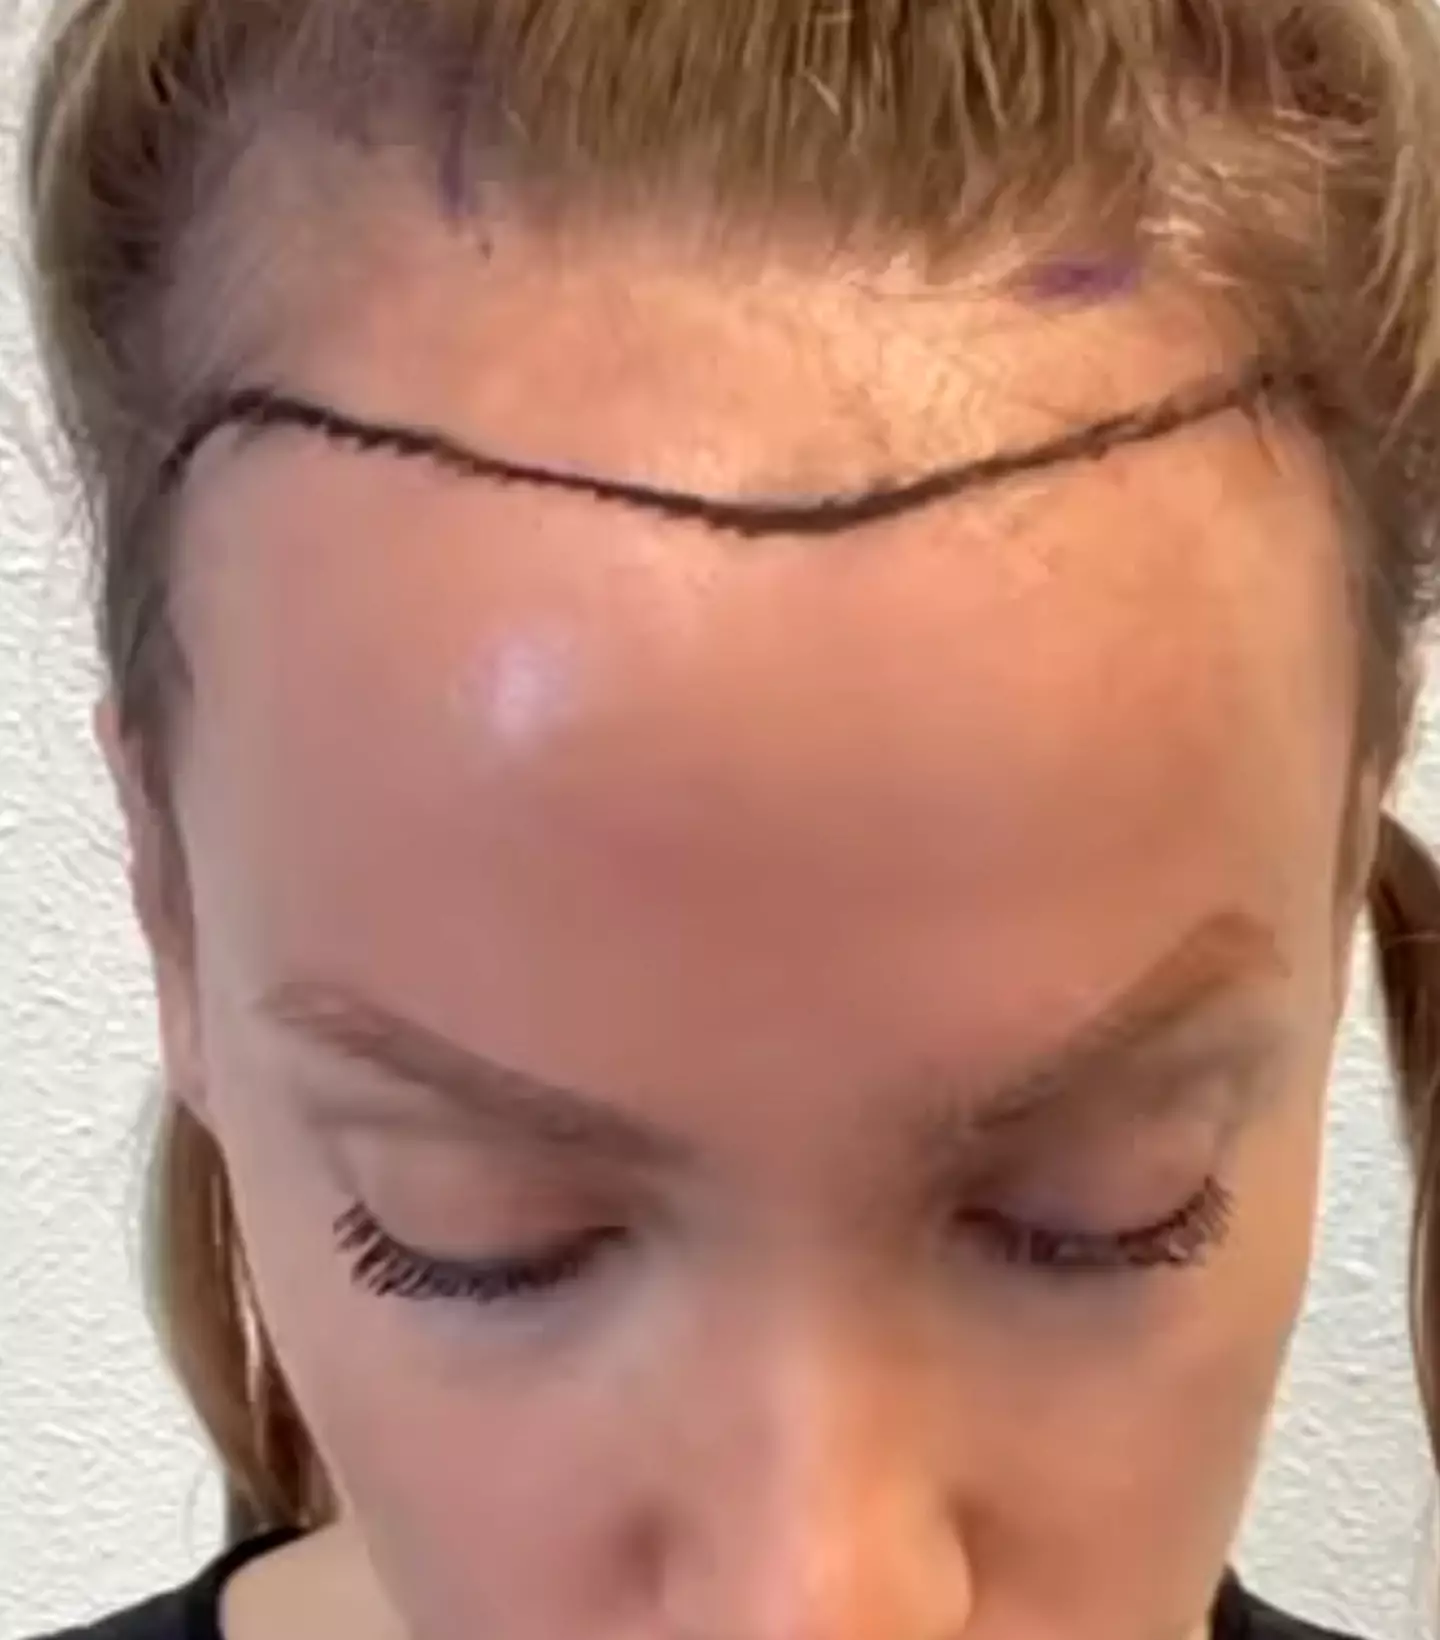 Sonja was insecure about her forehead before the transplant.